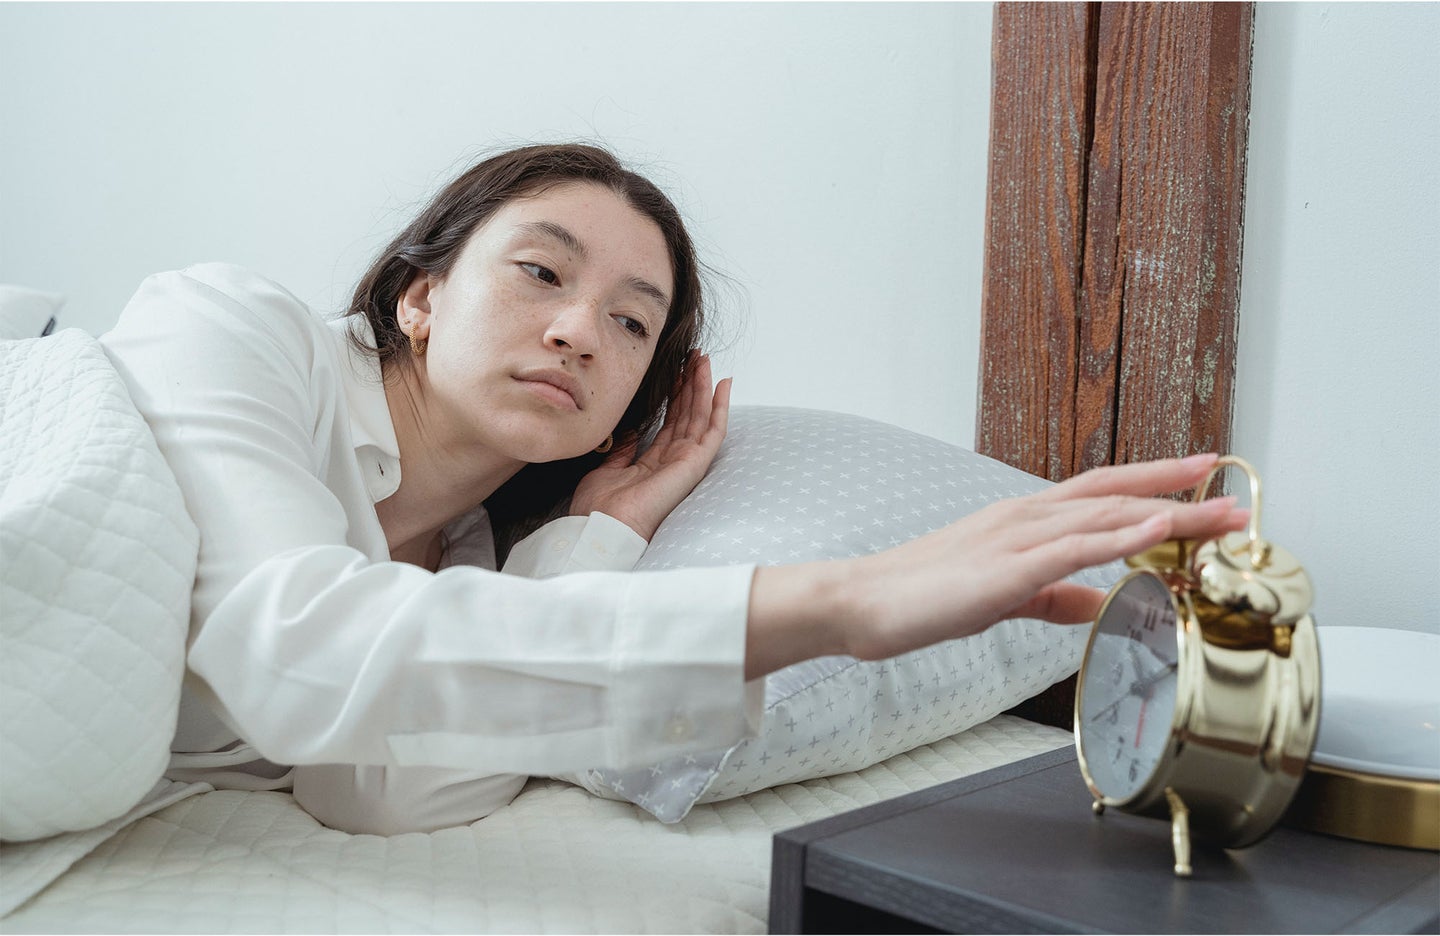 A woman in a long sleeve white shirt reaches from bed to turn off her alarm clock.